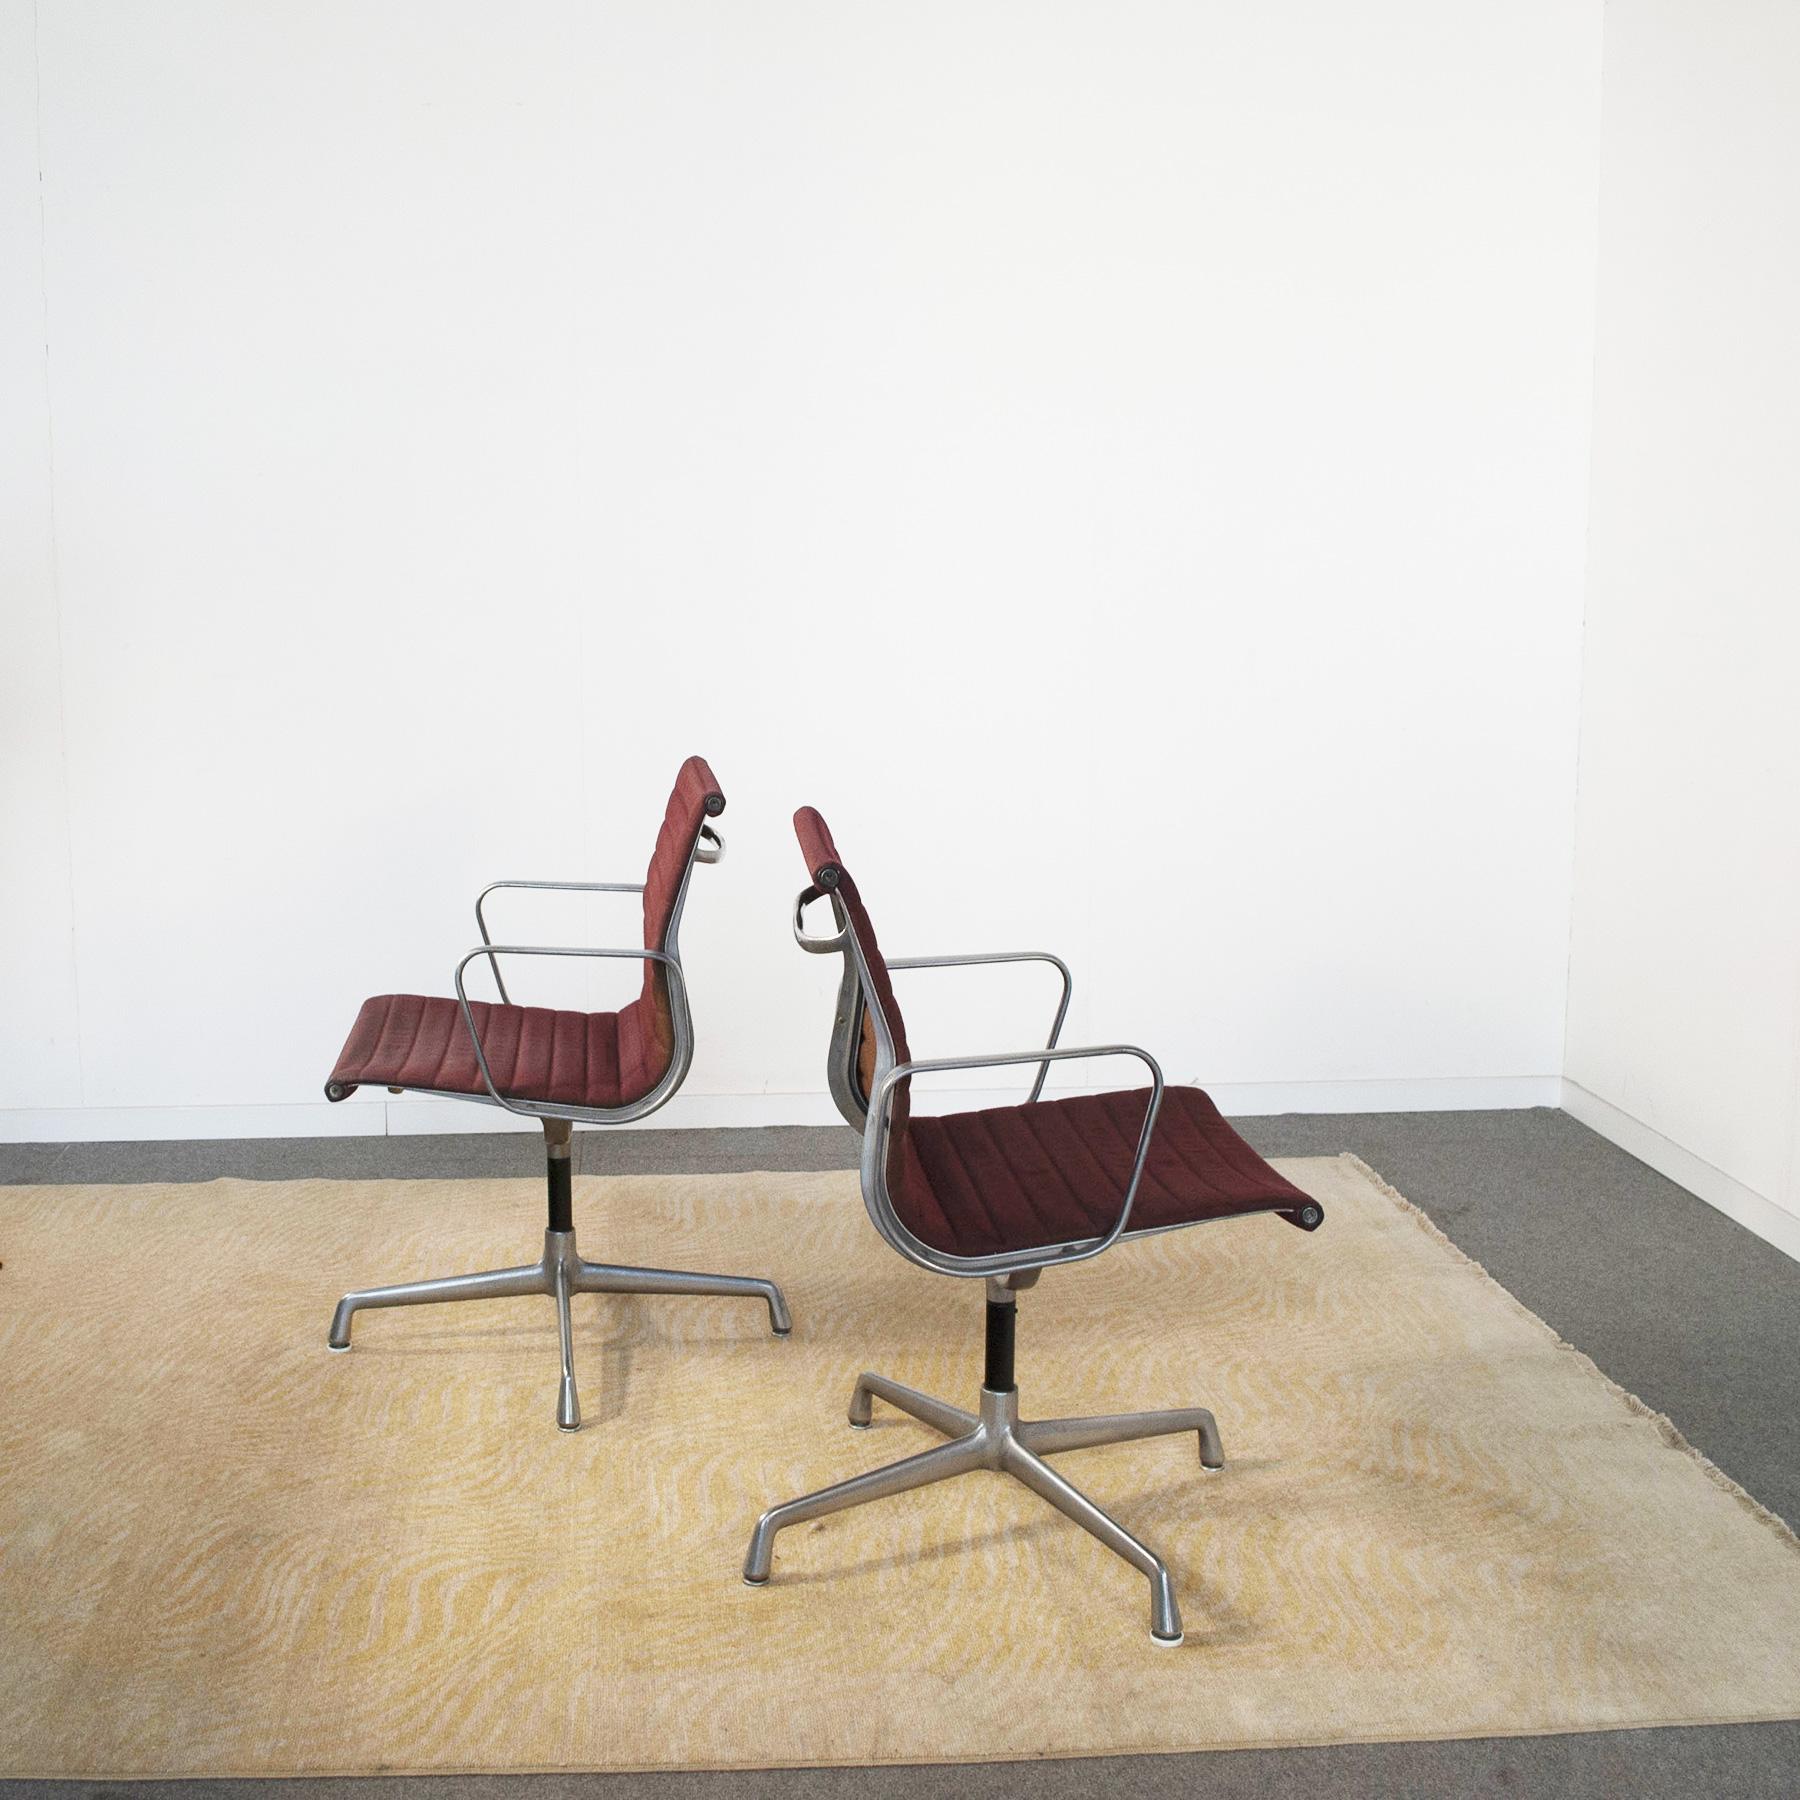 Late 20th Century Charles Eames Lounge Chairs for Herman Miller For Sale